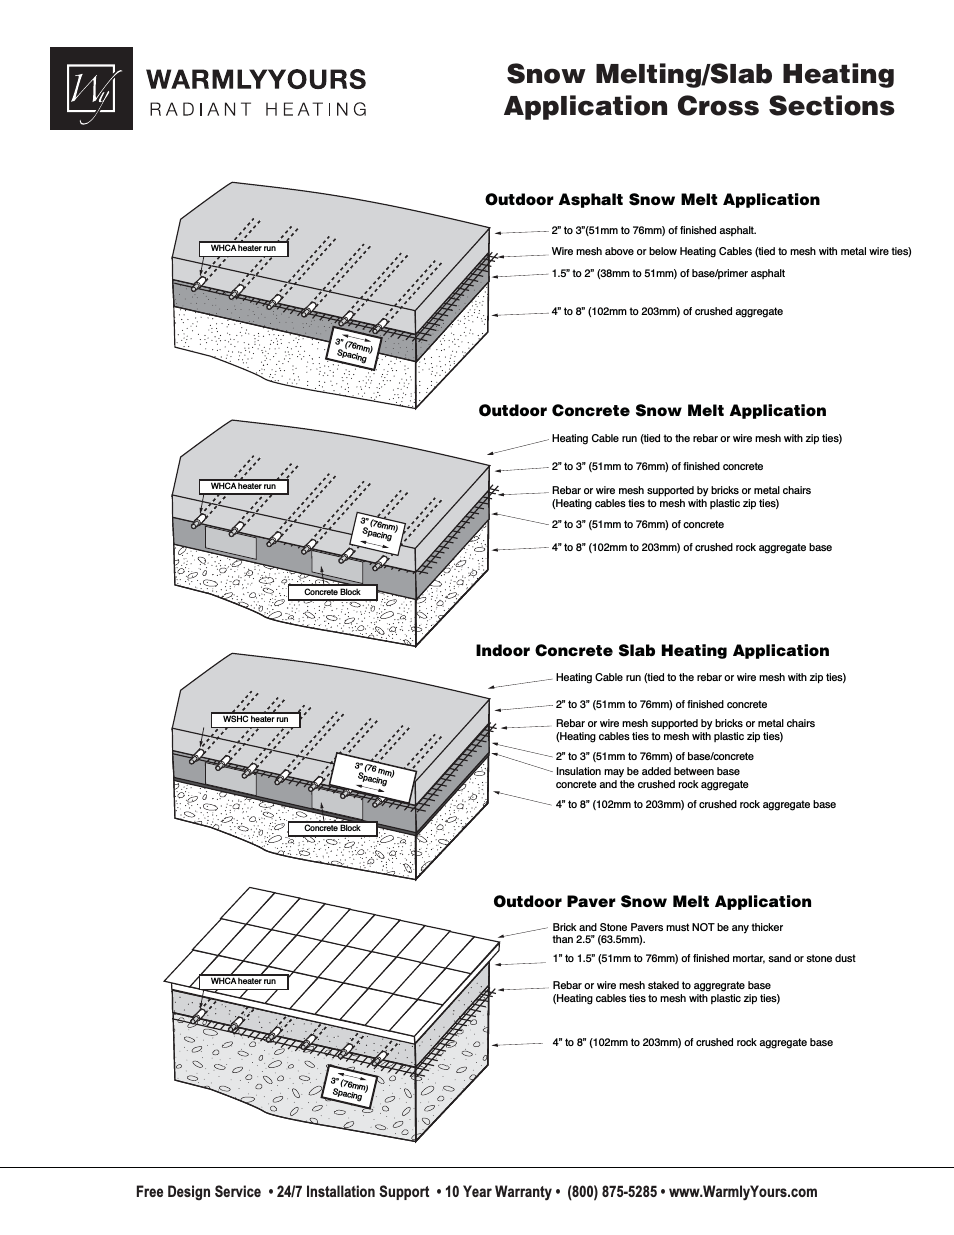 Snow Melting & Slab Heating Application Cross Sections